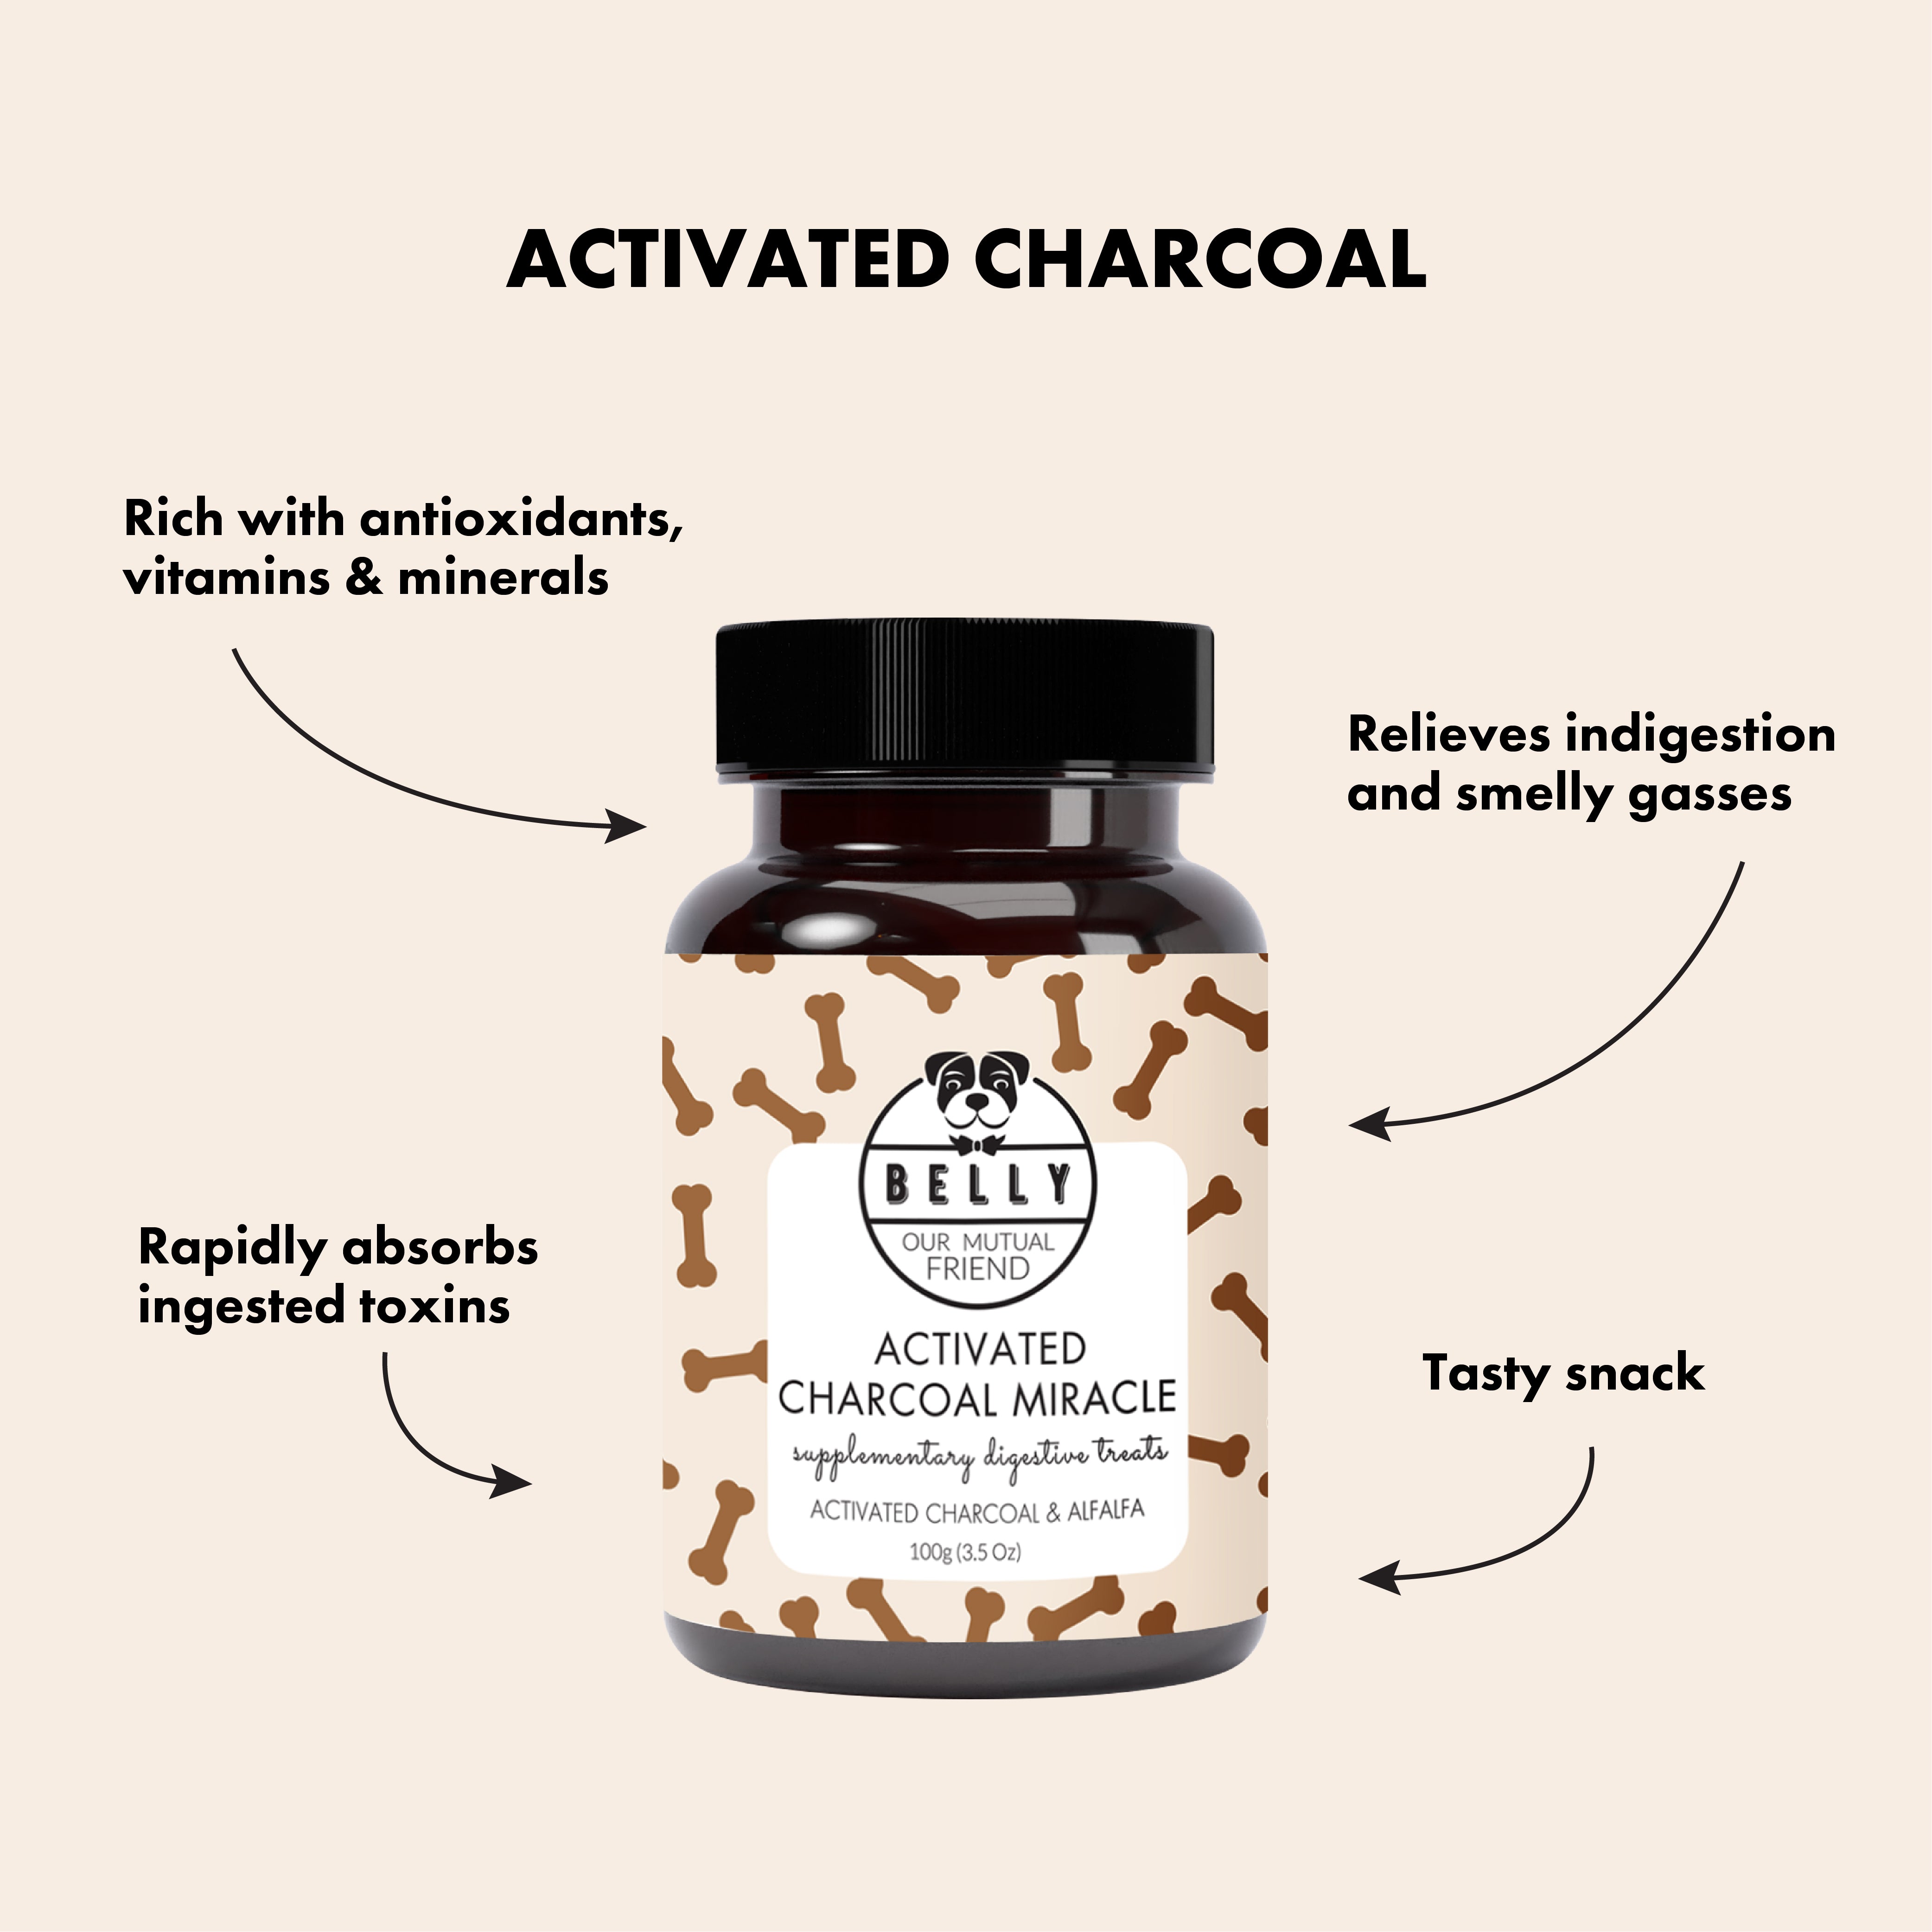 Activated Charcoal benefits